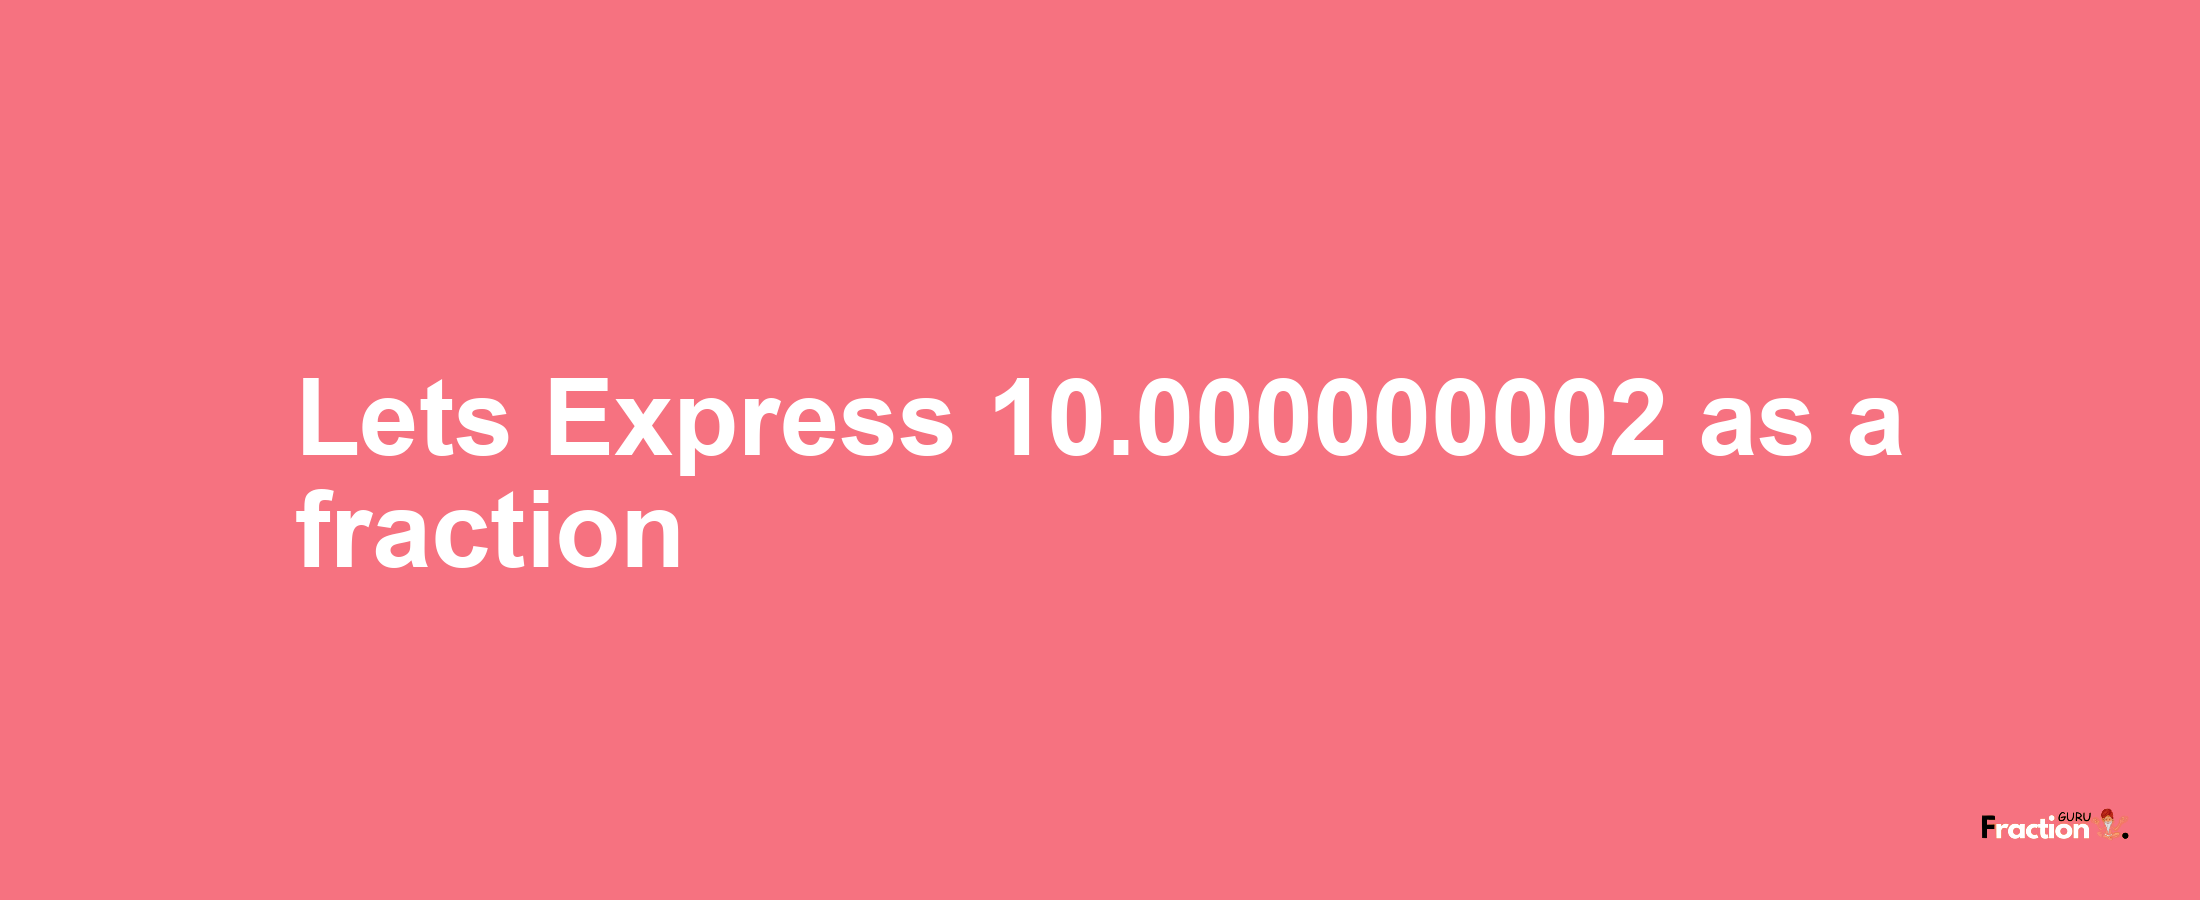 Lets Express 10.000000002 as afraction